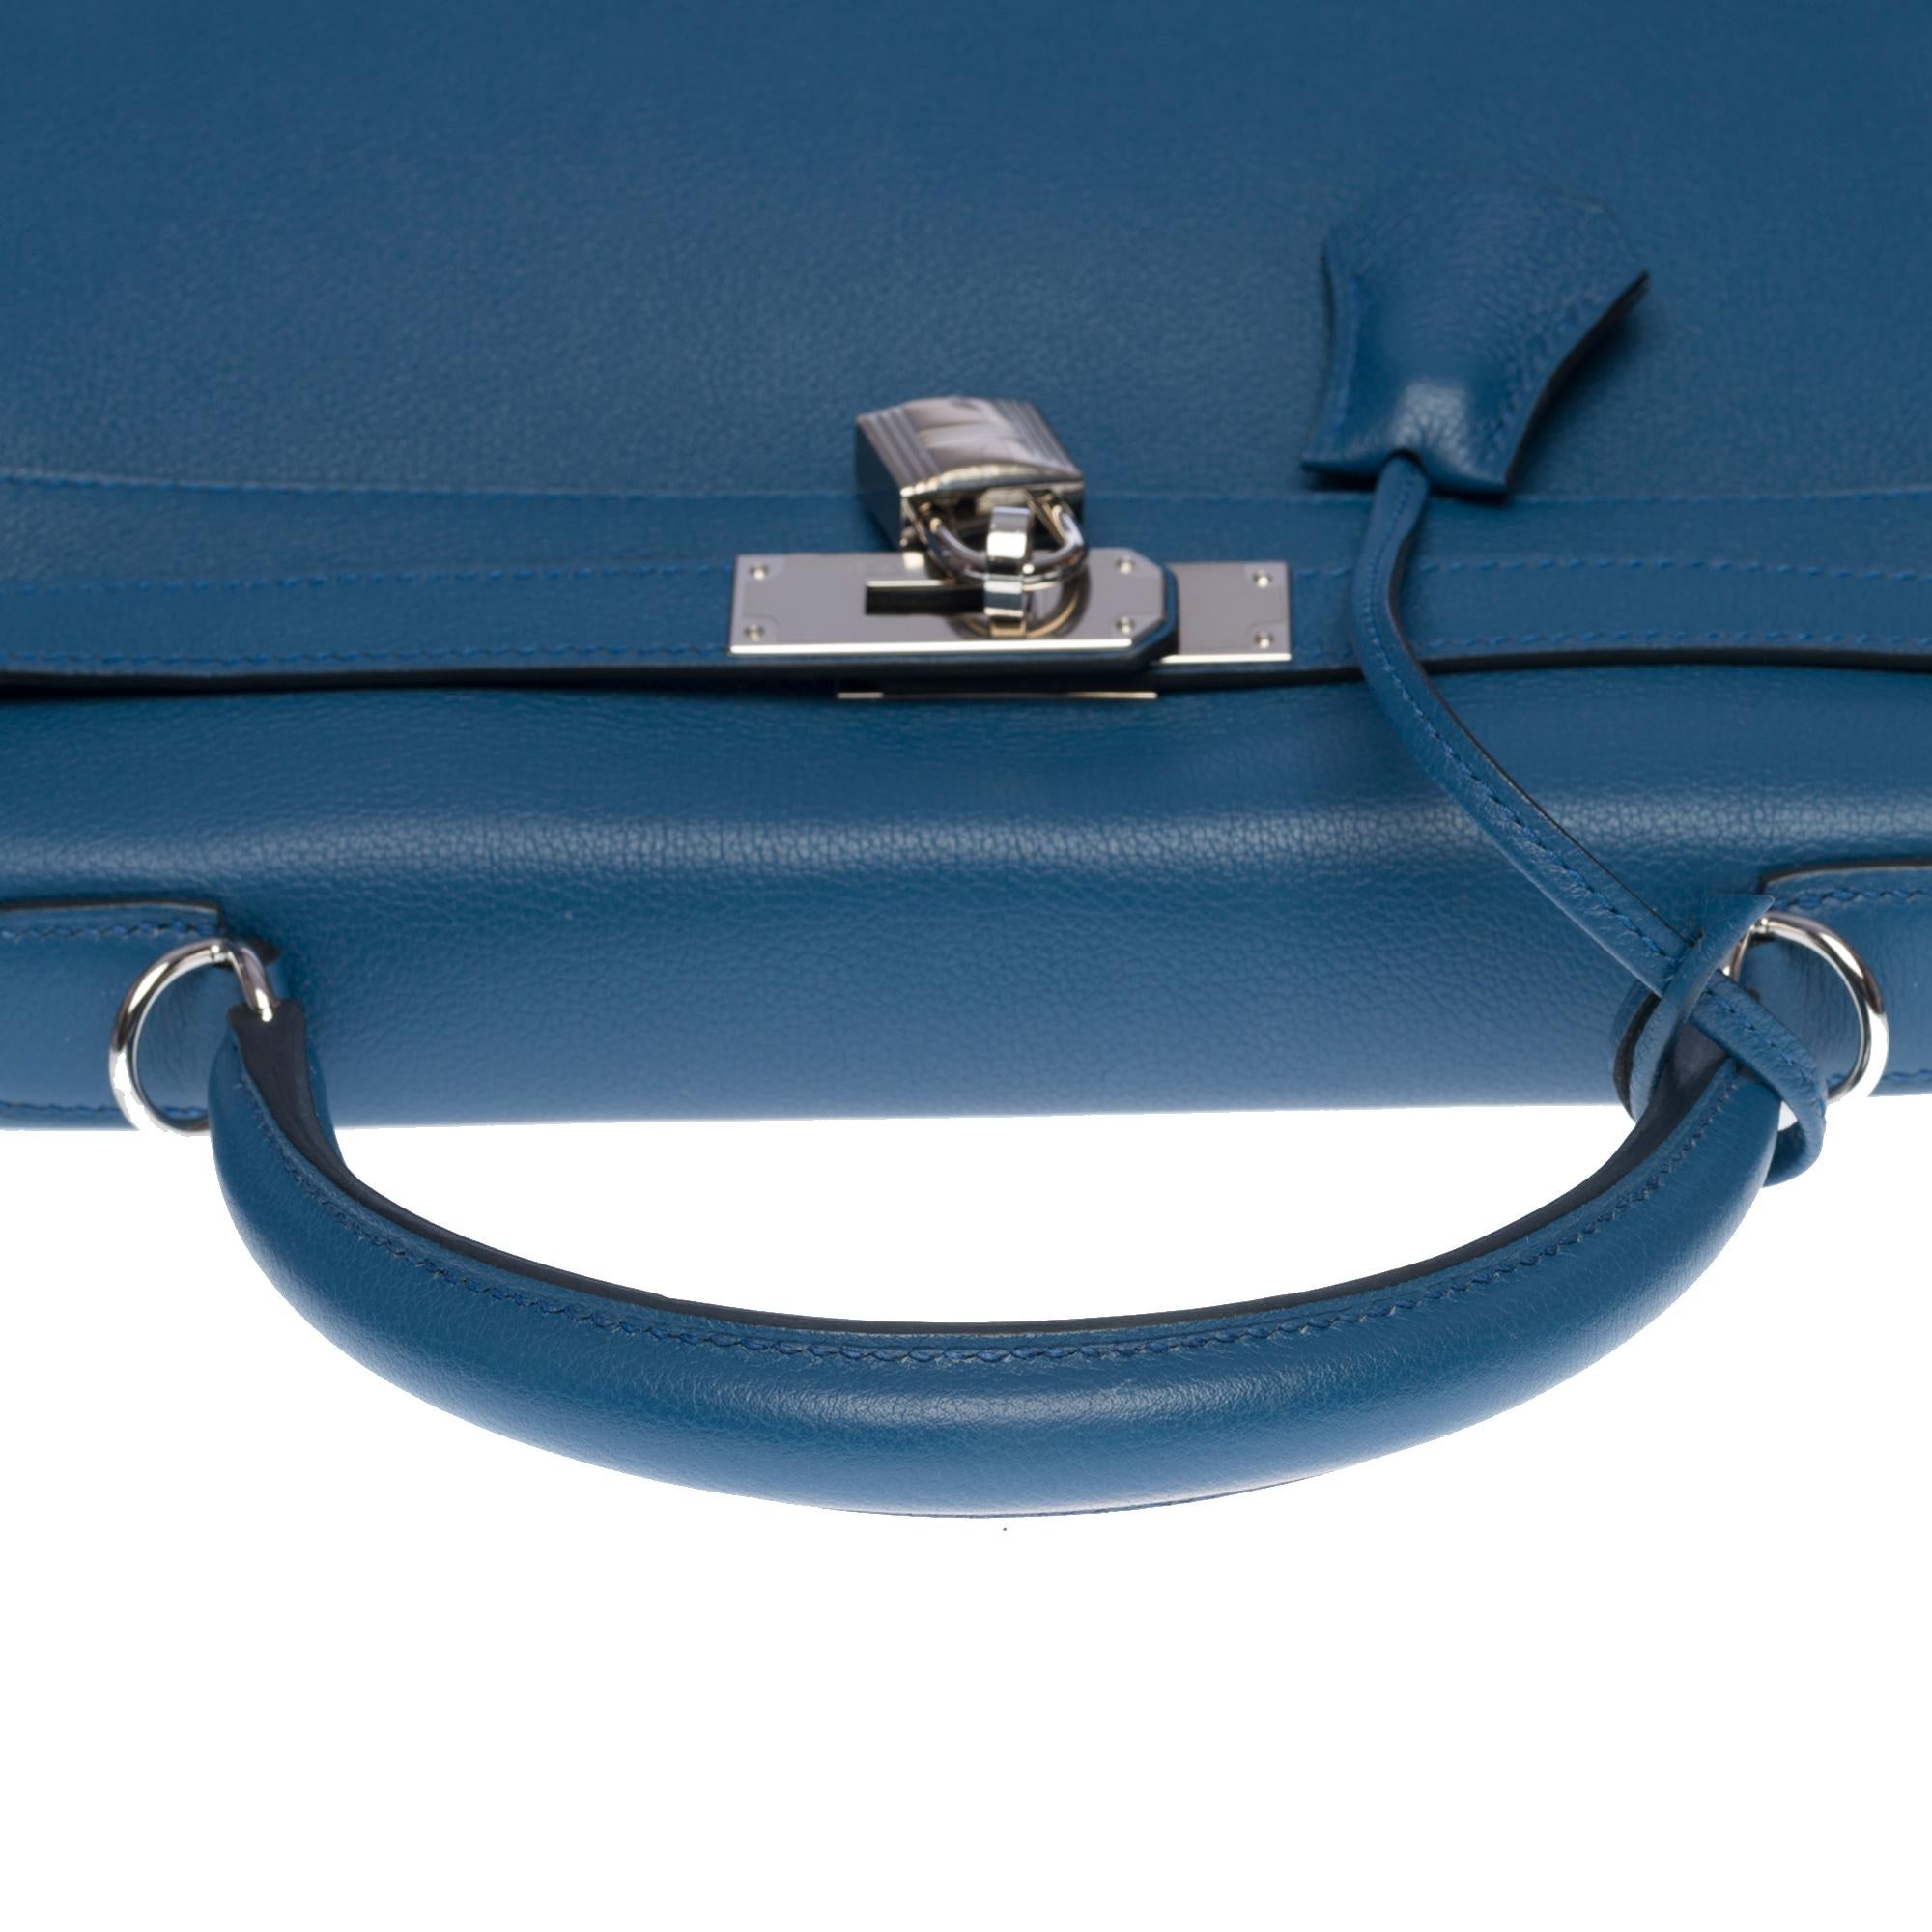 Hermès Kelly 32cm handbag with strap in Evercolor blue Agate leather, SHW 3